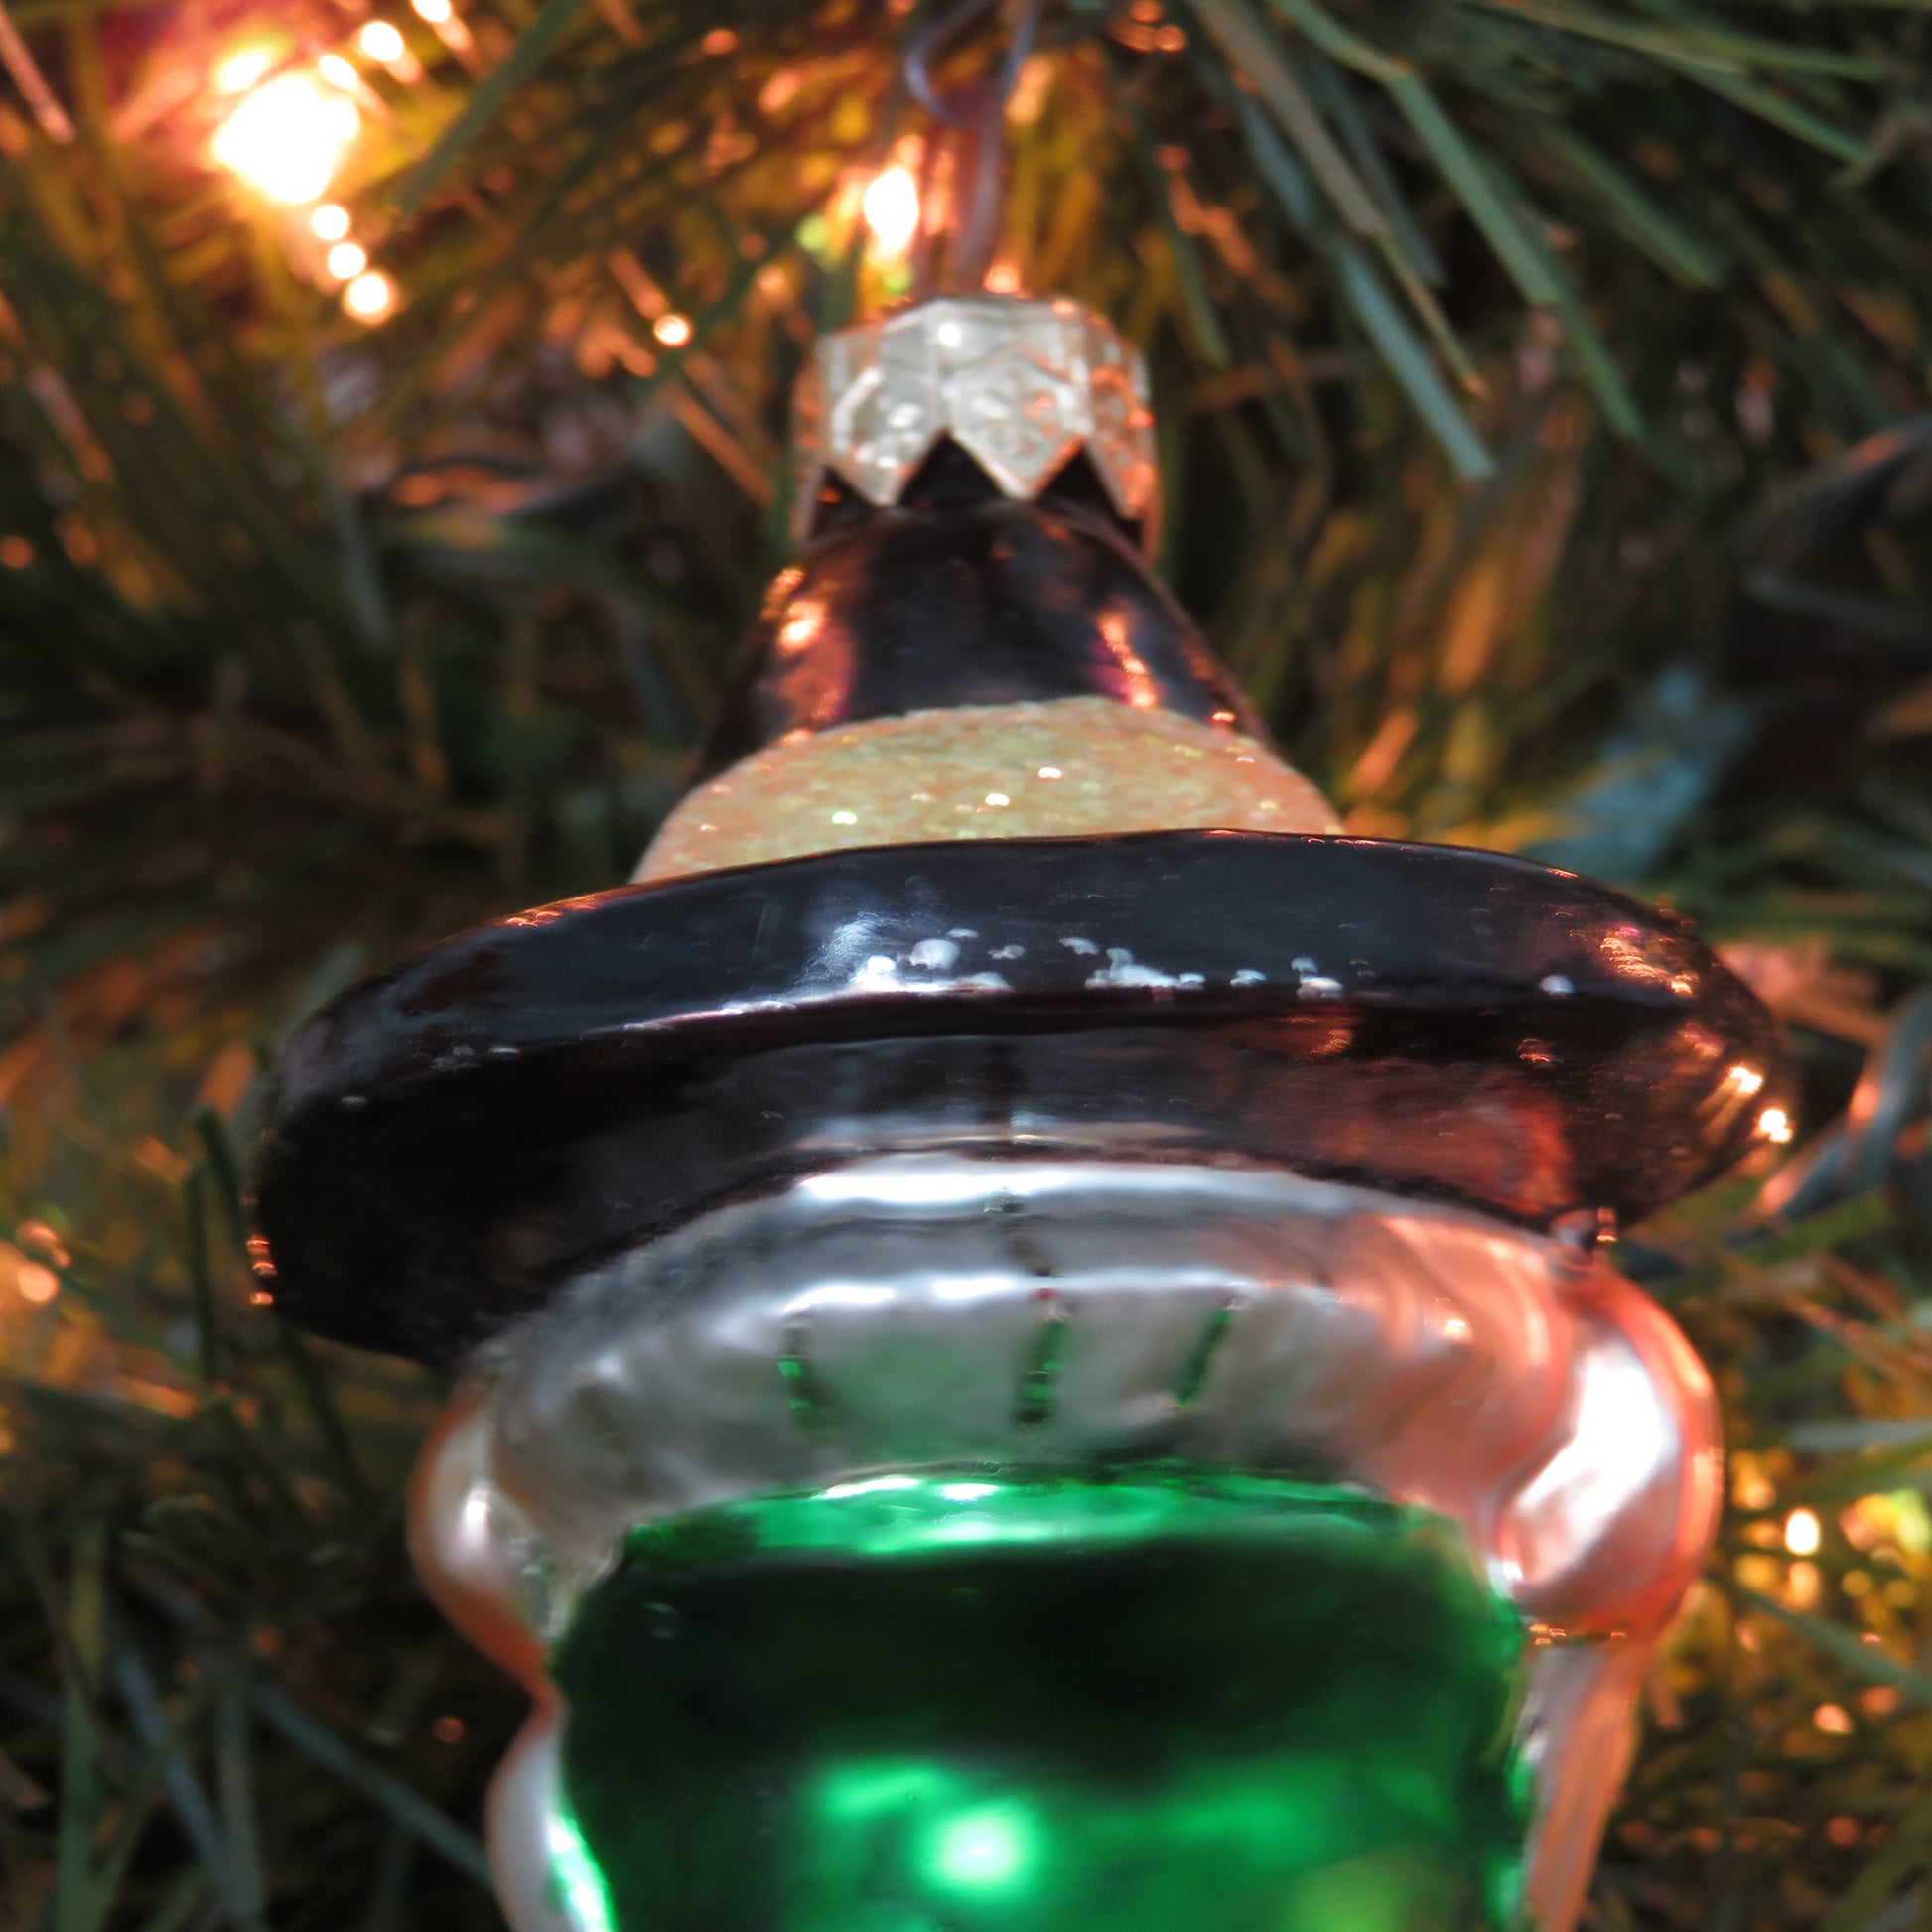 Vintage Leprechaun Glass Ornament Christopher Radko Tall N Stout O'leary St Patrick's Day Little Gems Green Christmas 2000 - At Grandma's Table